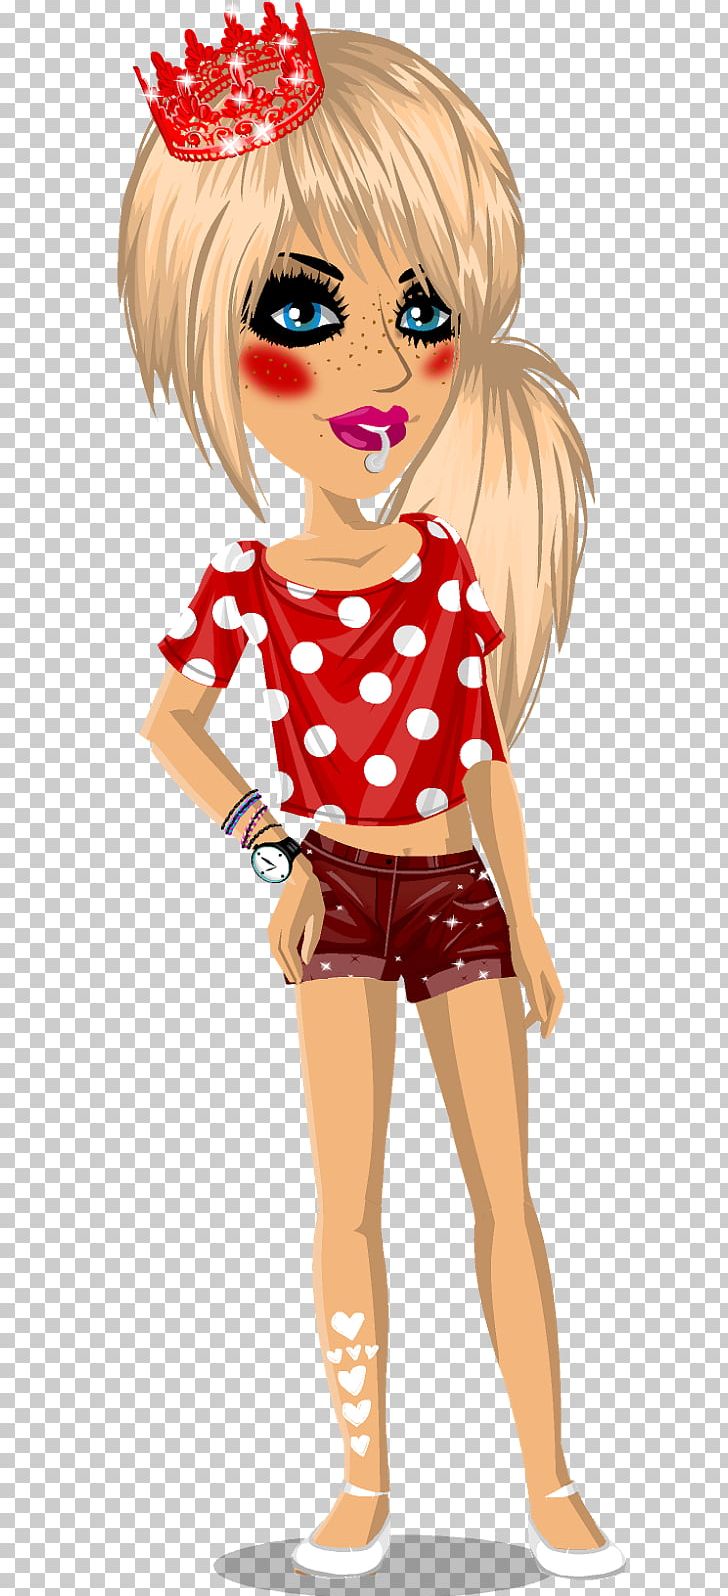 MovieStarPlanet Web Browser Wiki Human Skin Color PNG, Clipart, Anime, Art, Barbie, Blond, Brown Hair Free PNG Download